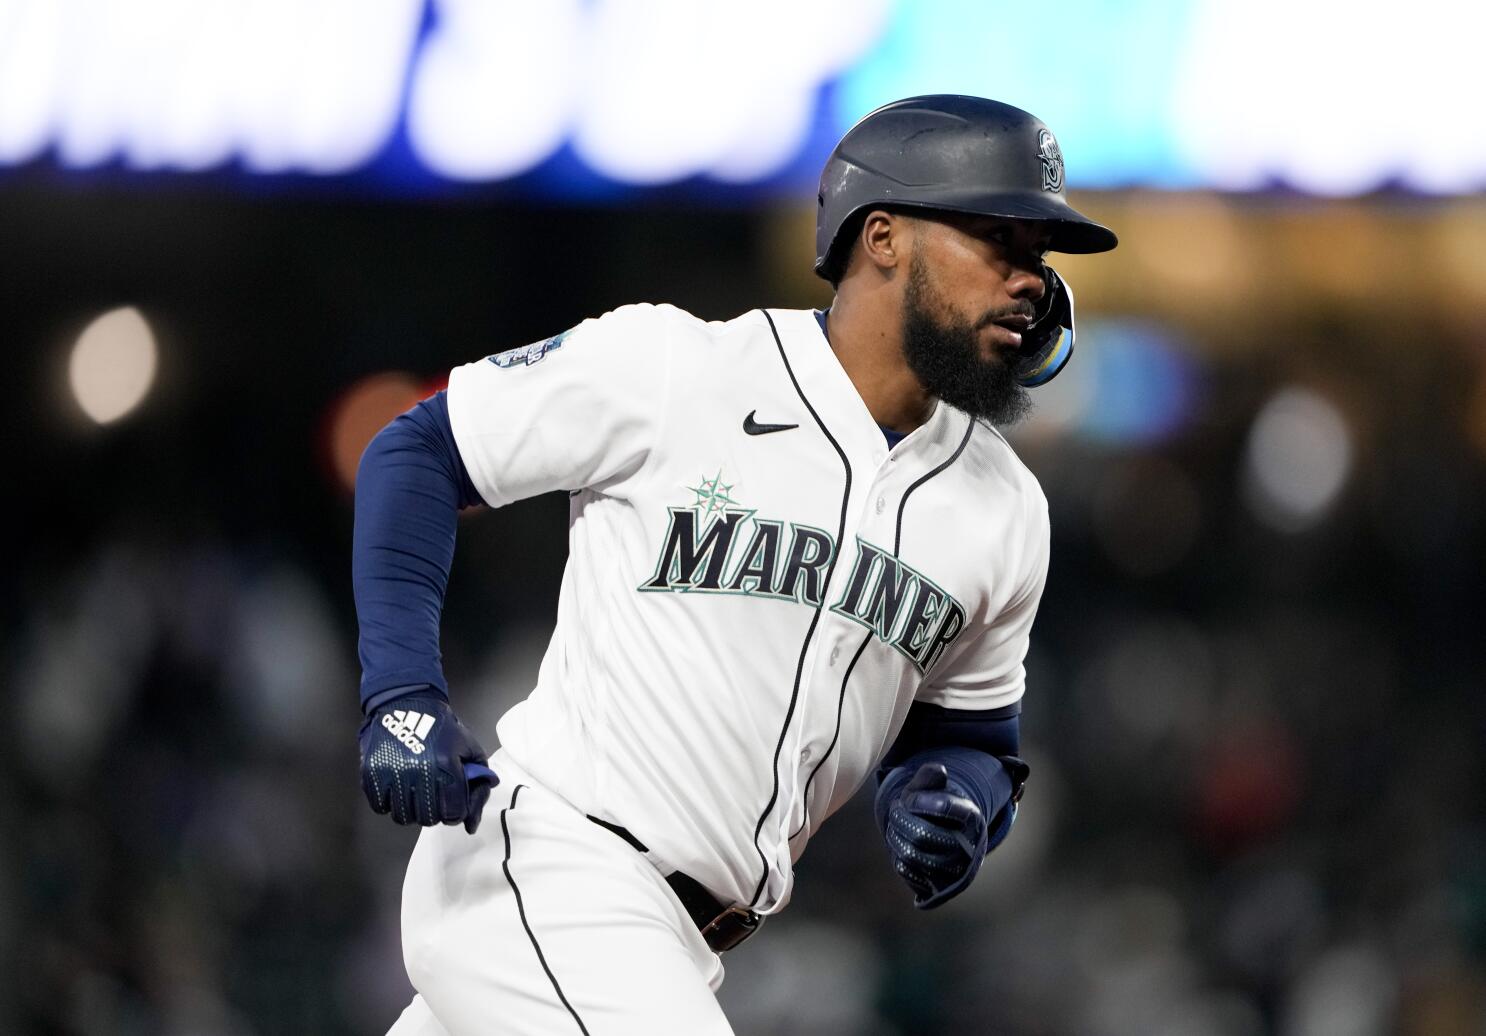 Hernández, Pollock both homer twice as Mariners rout Angels - The